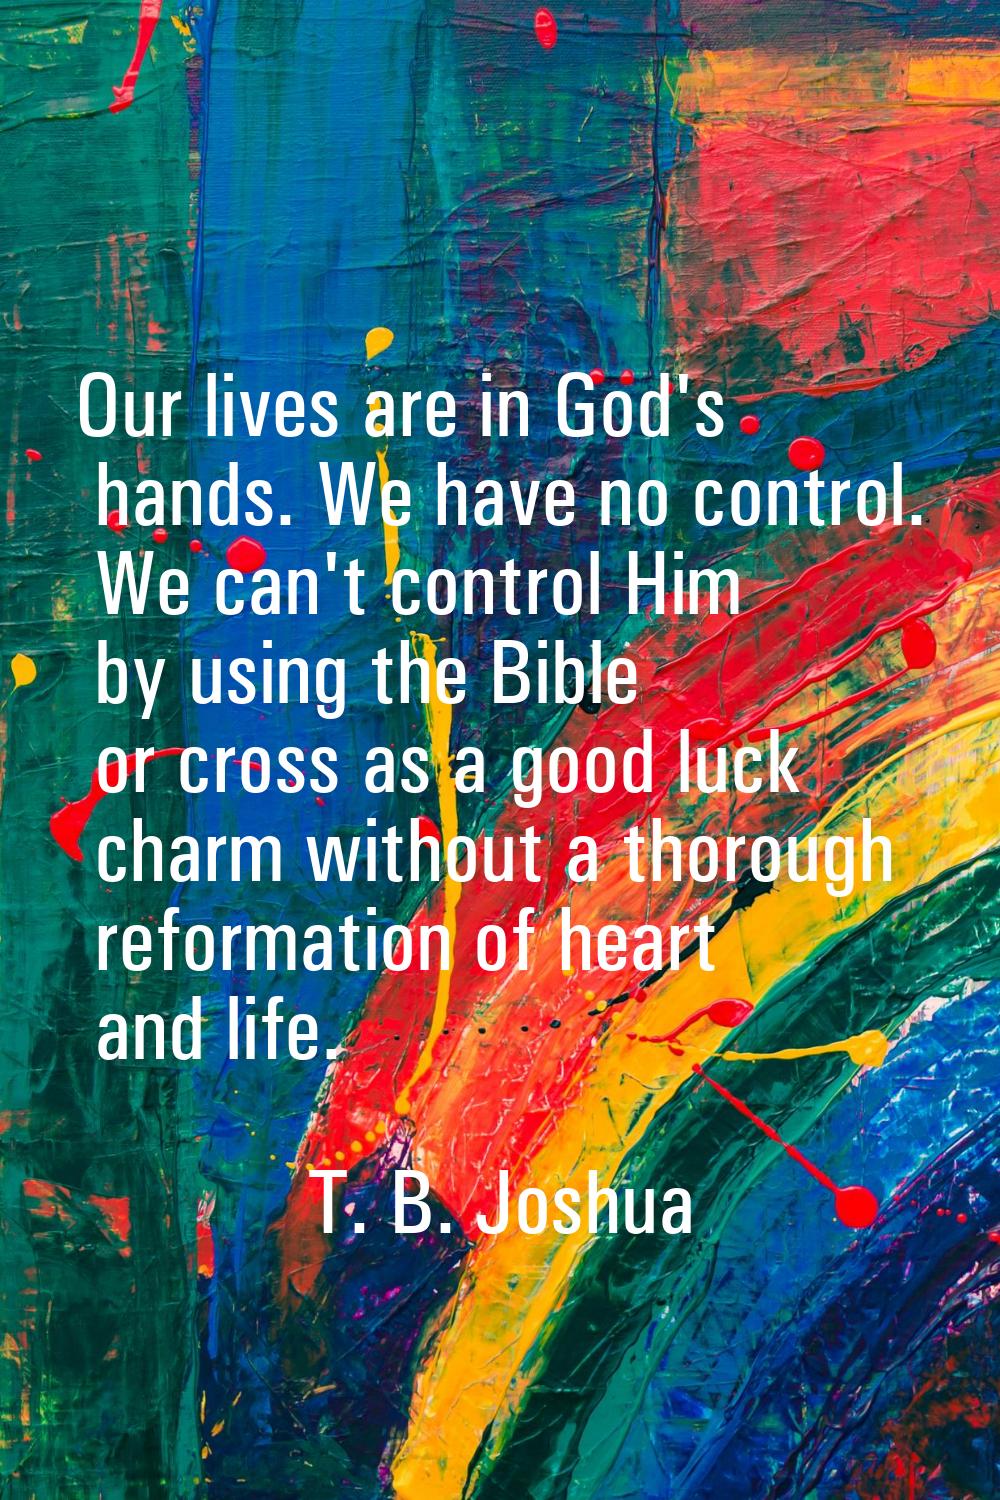 Our lives are in God's hands. We have no control. We can't control Him by using the Bible or cross 